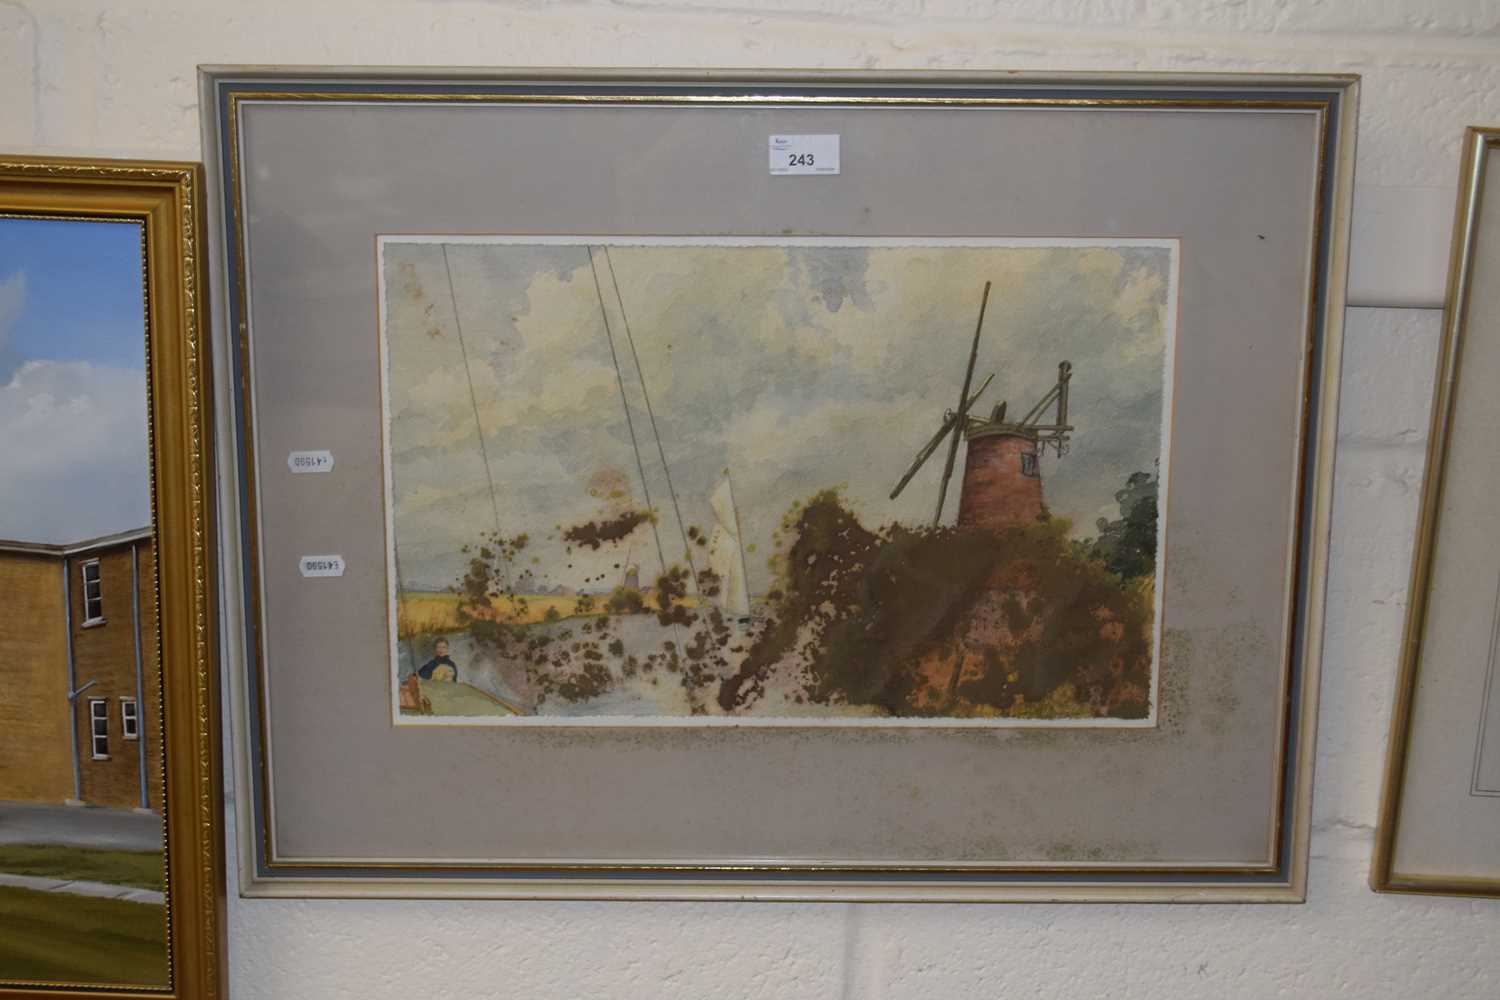 Watercolour study of a Broadland scene with windmill, heavily foxed, framed and glazed